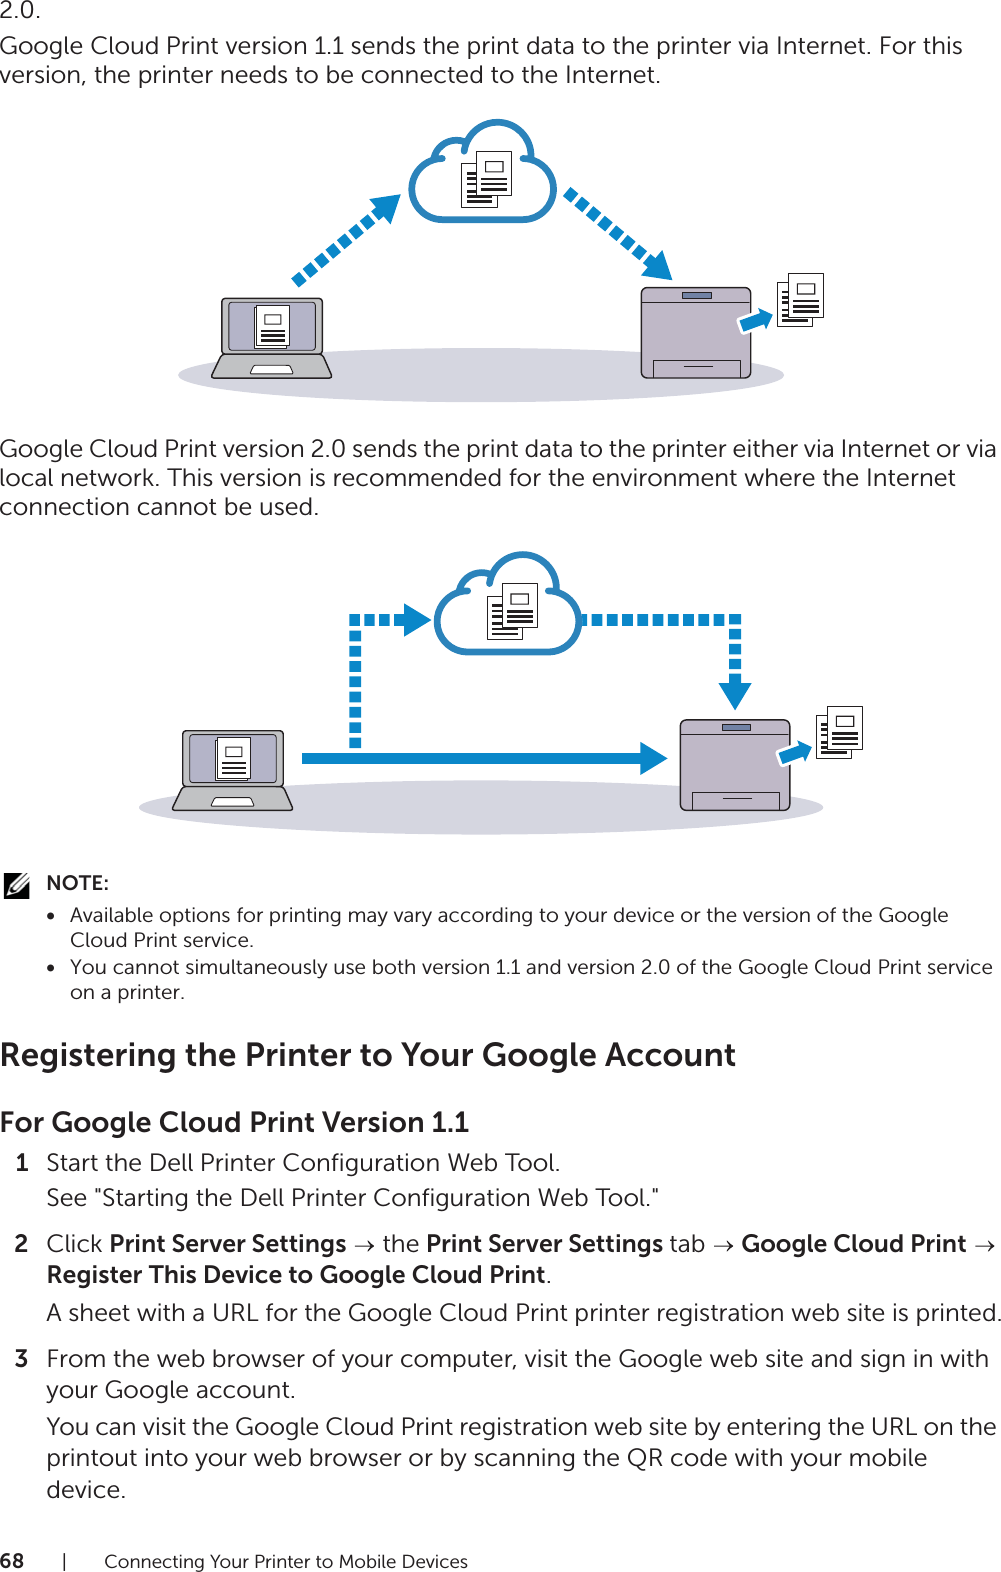 68| Connecting Your Printer to Mobile Devices2.0.Google Cloud Print version 1.1 sends the print data to the printer via Internet. For this version, the printer needs to be connected to the Internet.Google Cloud Print version 2.0 sends the print data to the printer either via Internet or via local network. This version is recommended for the environment where the Internet connection cannot be used.NOTE:•Available options for printing may vary according to your device or the version of the Google Cloud Print service.•You cannot simultaneously use both version 1.1 and version 2.0 of the Google Cloud Print service on a printer.Registering the Printer to Your Google AccountFor Google Cloud Print Version 1.11Start the Dell Printer Configuration Web Tool.See &quot;Starting the Dell Printer Configuration Web Tool.&quot;2Click Print Server Settings  the Print Server Settings tab   Google Cloud Print  Register This Device to Google Cloud Print.A sheet with a URL for the Google Cloud Print printer registration web site is printed.3From the web browser of your computer, visit the Google web site and sign in with your Google account.You can visit the Google Cloud Print registration web site by entering the URL on the printout into your web browser or by scanning the QR code with your mobile device.